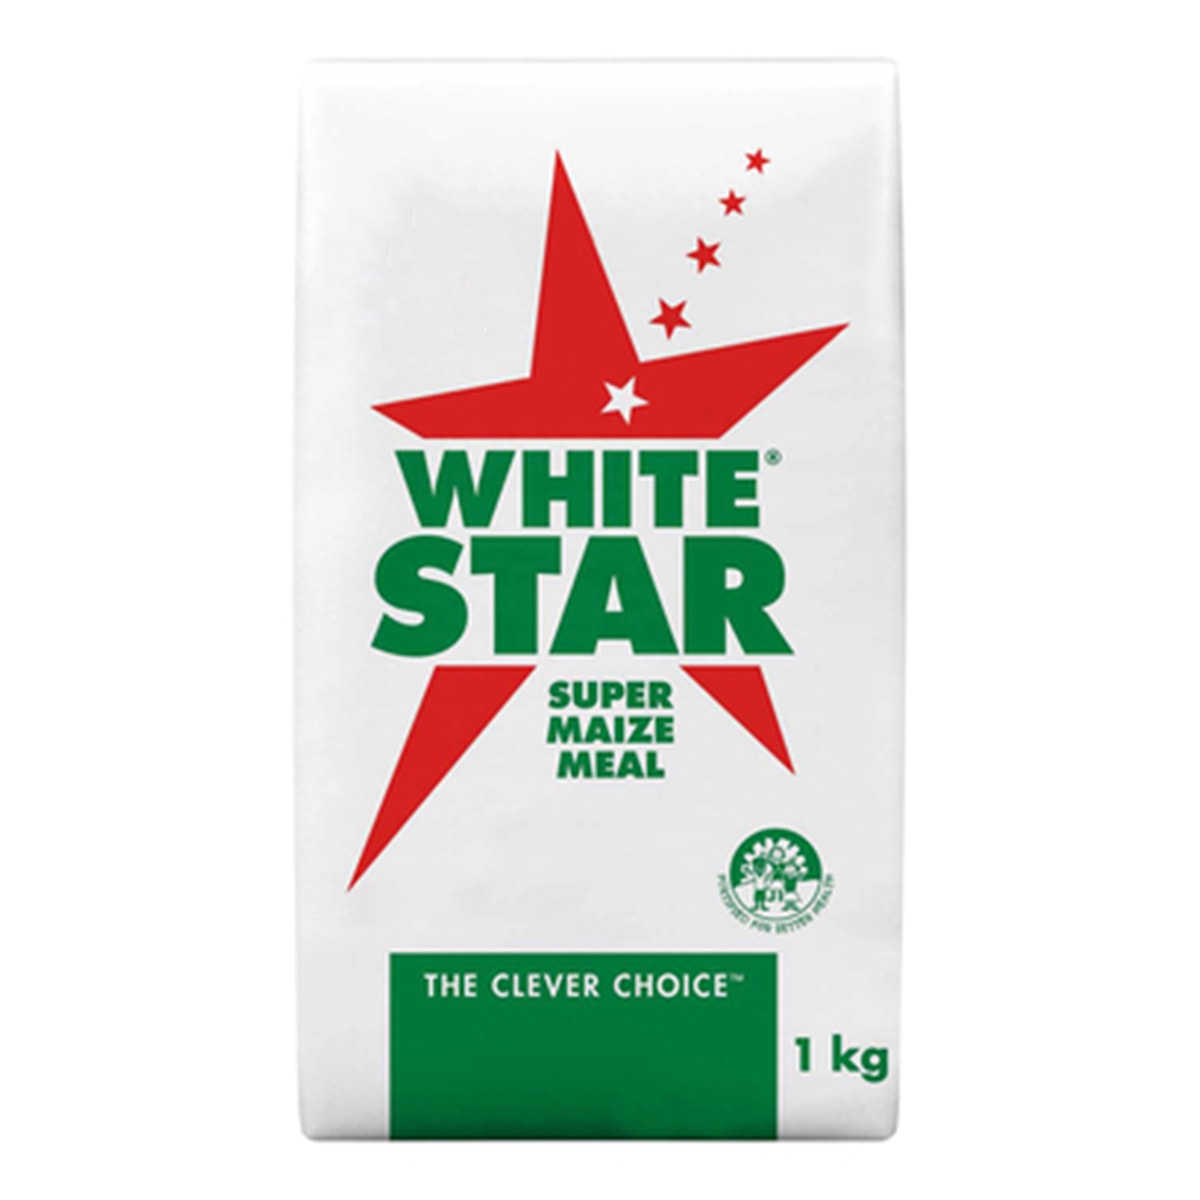 Buy Star of Africa Super Maize Meal - 1 kg